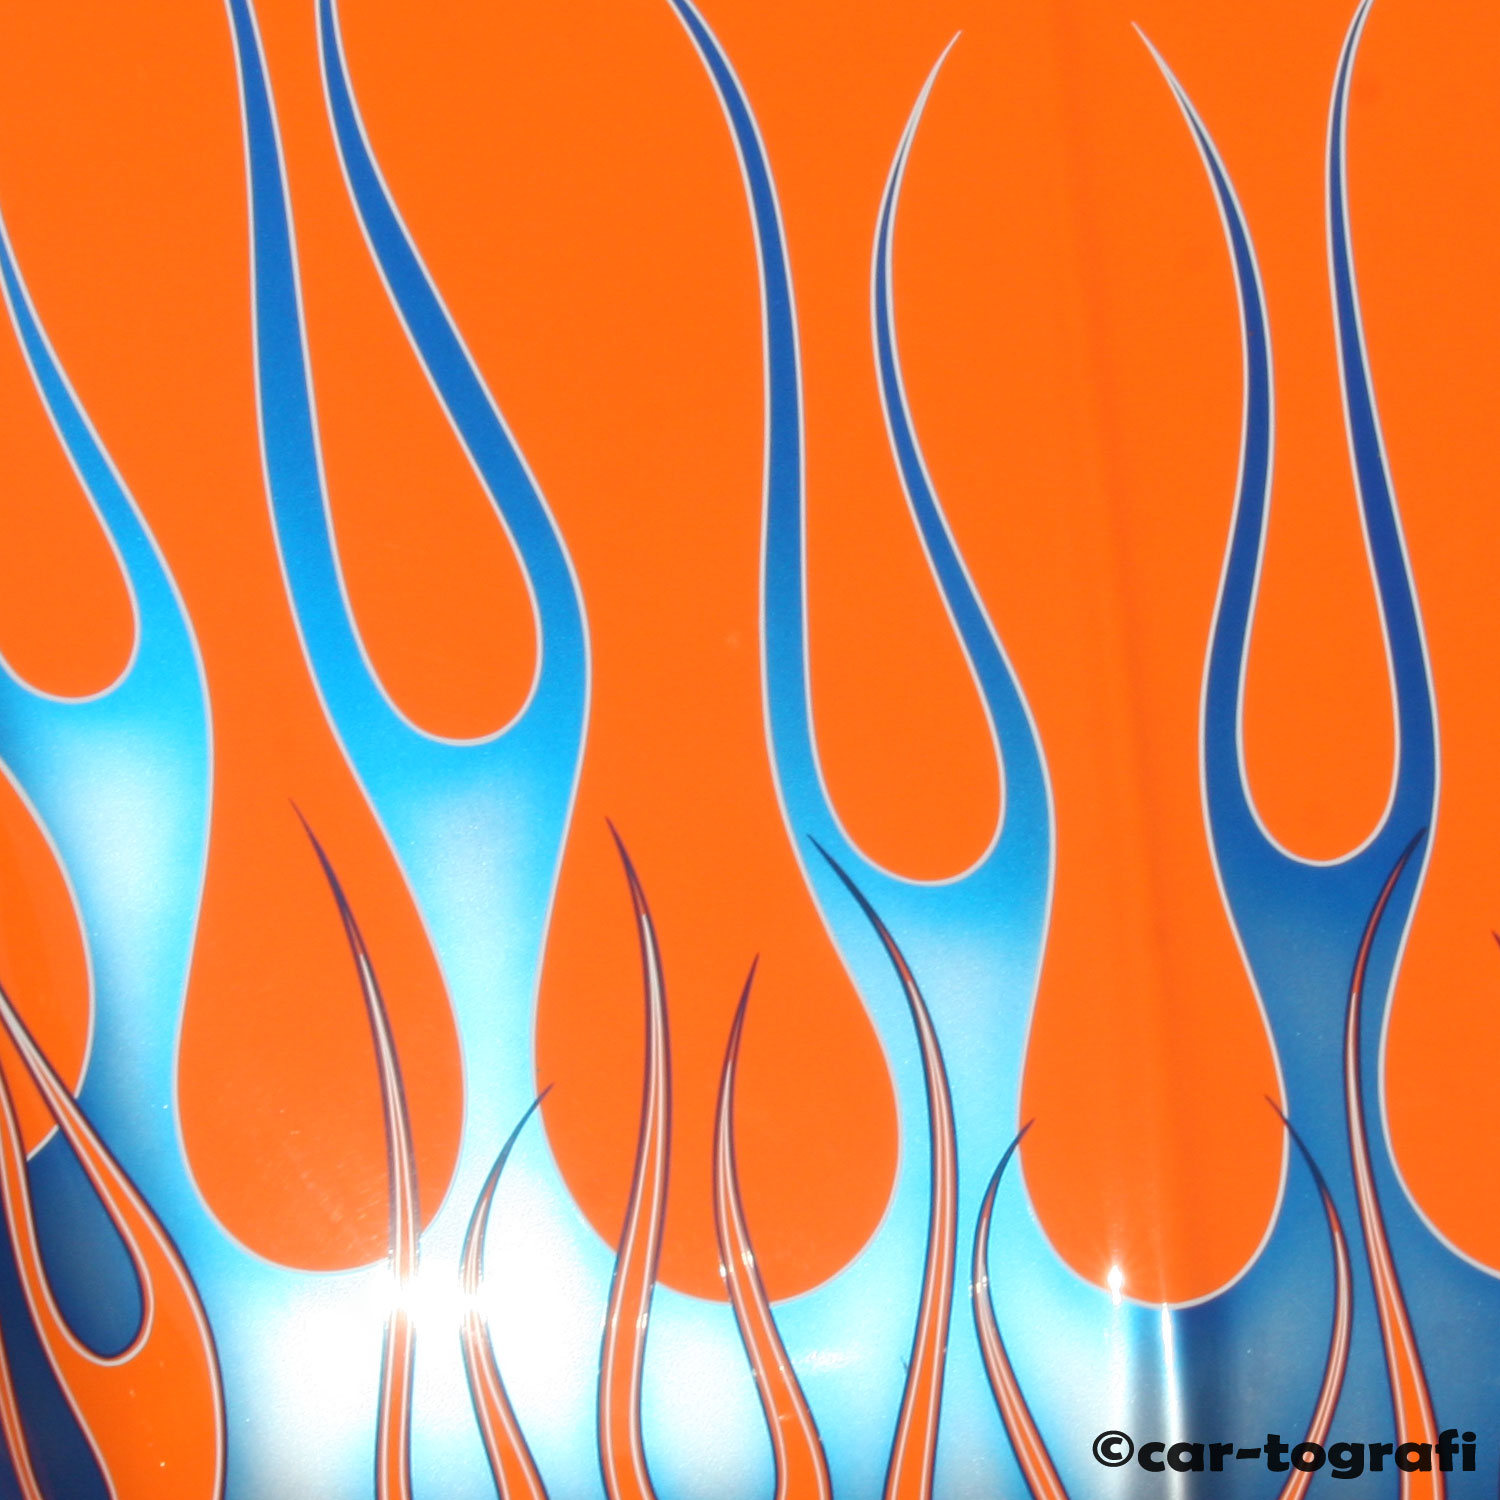 Flames in orange and blue